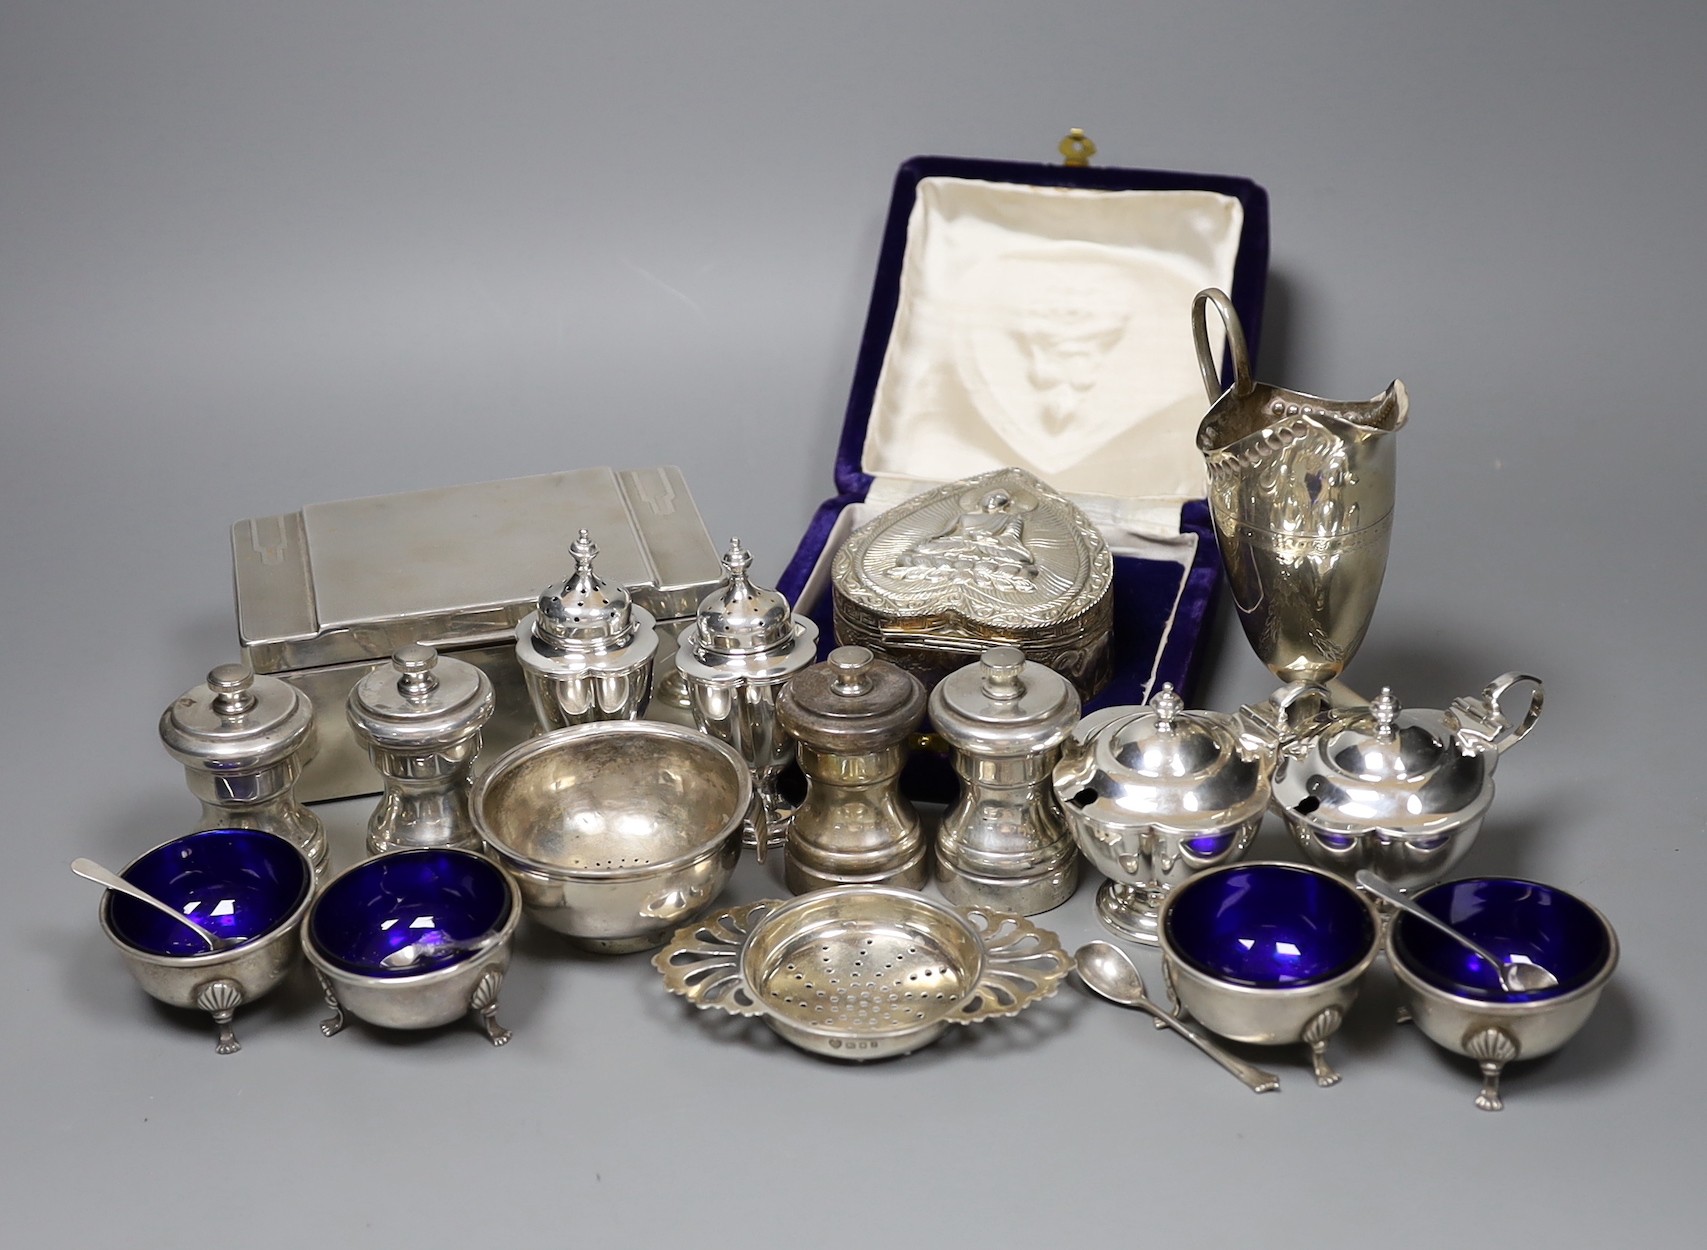 A Victorian engraved silver cream jug, Sheffield 1882, 13cm., engine-turned silver cigarette case, collection of pepper grinders, condiments, etc.